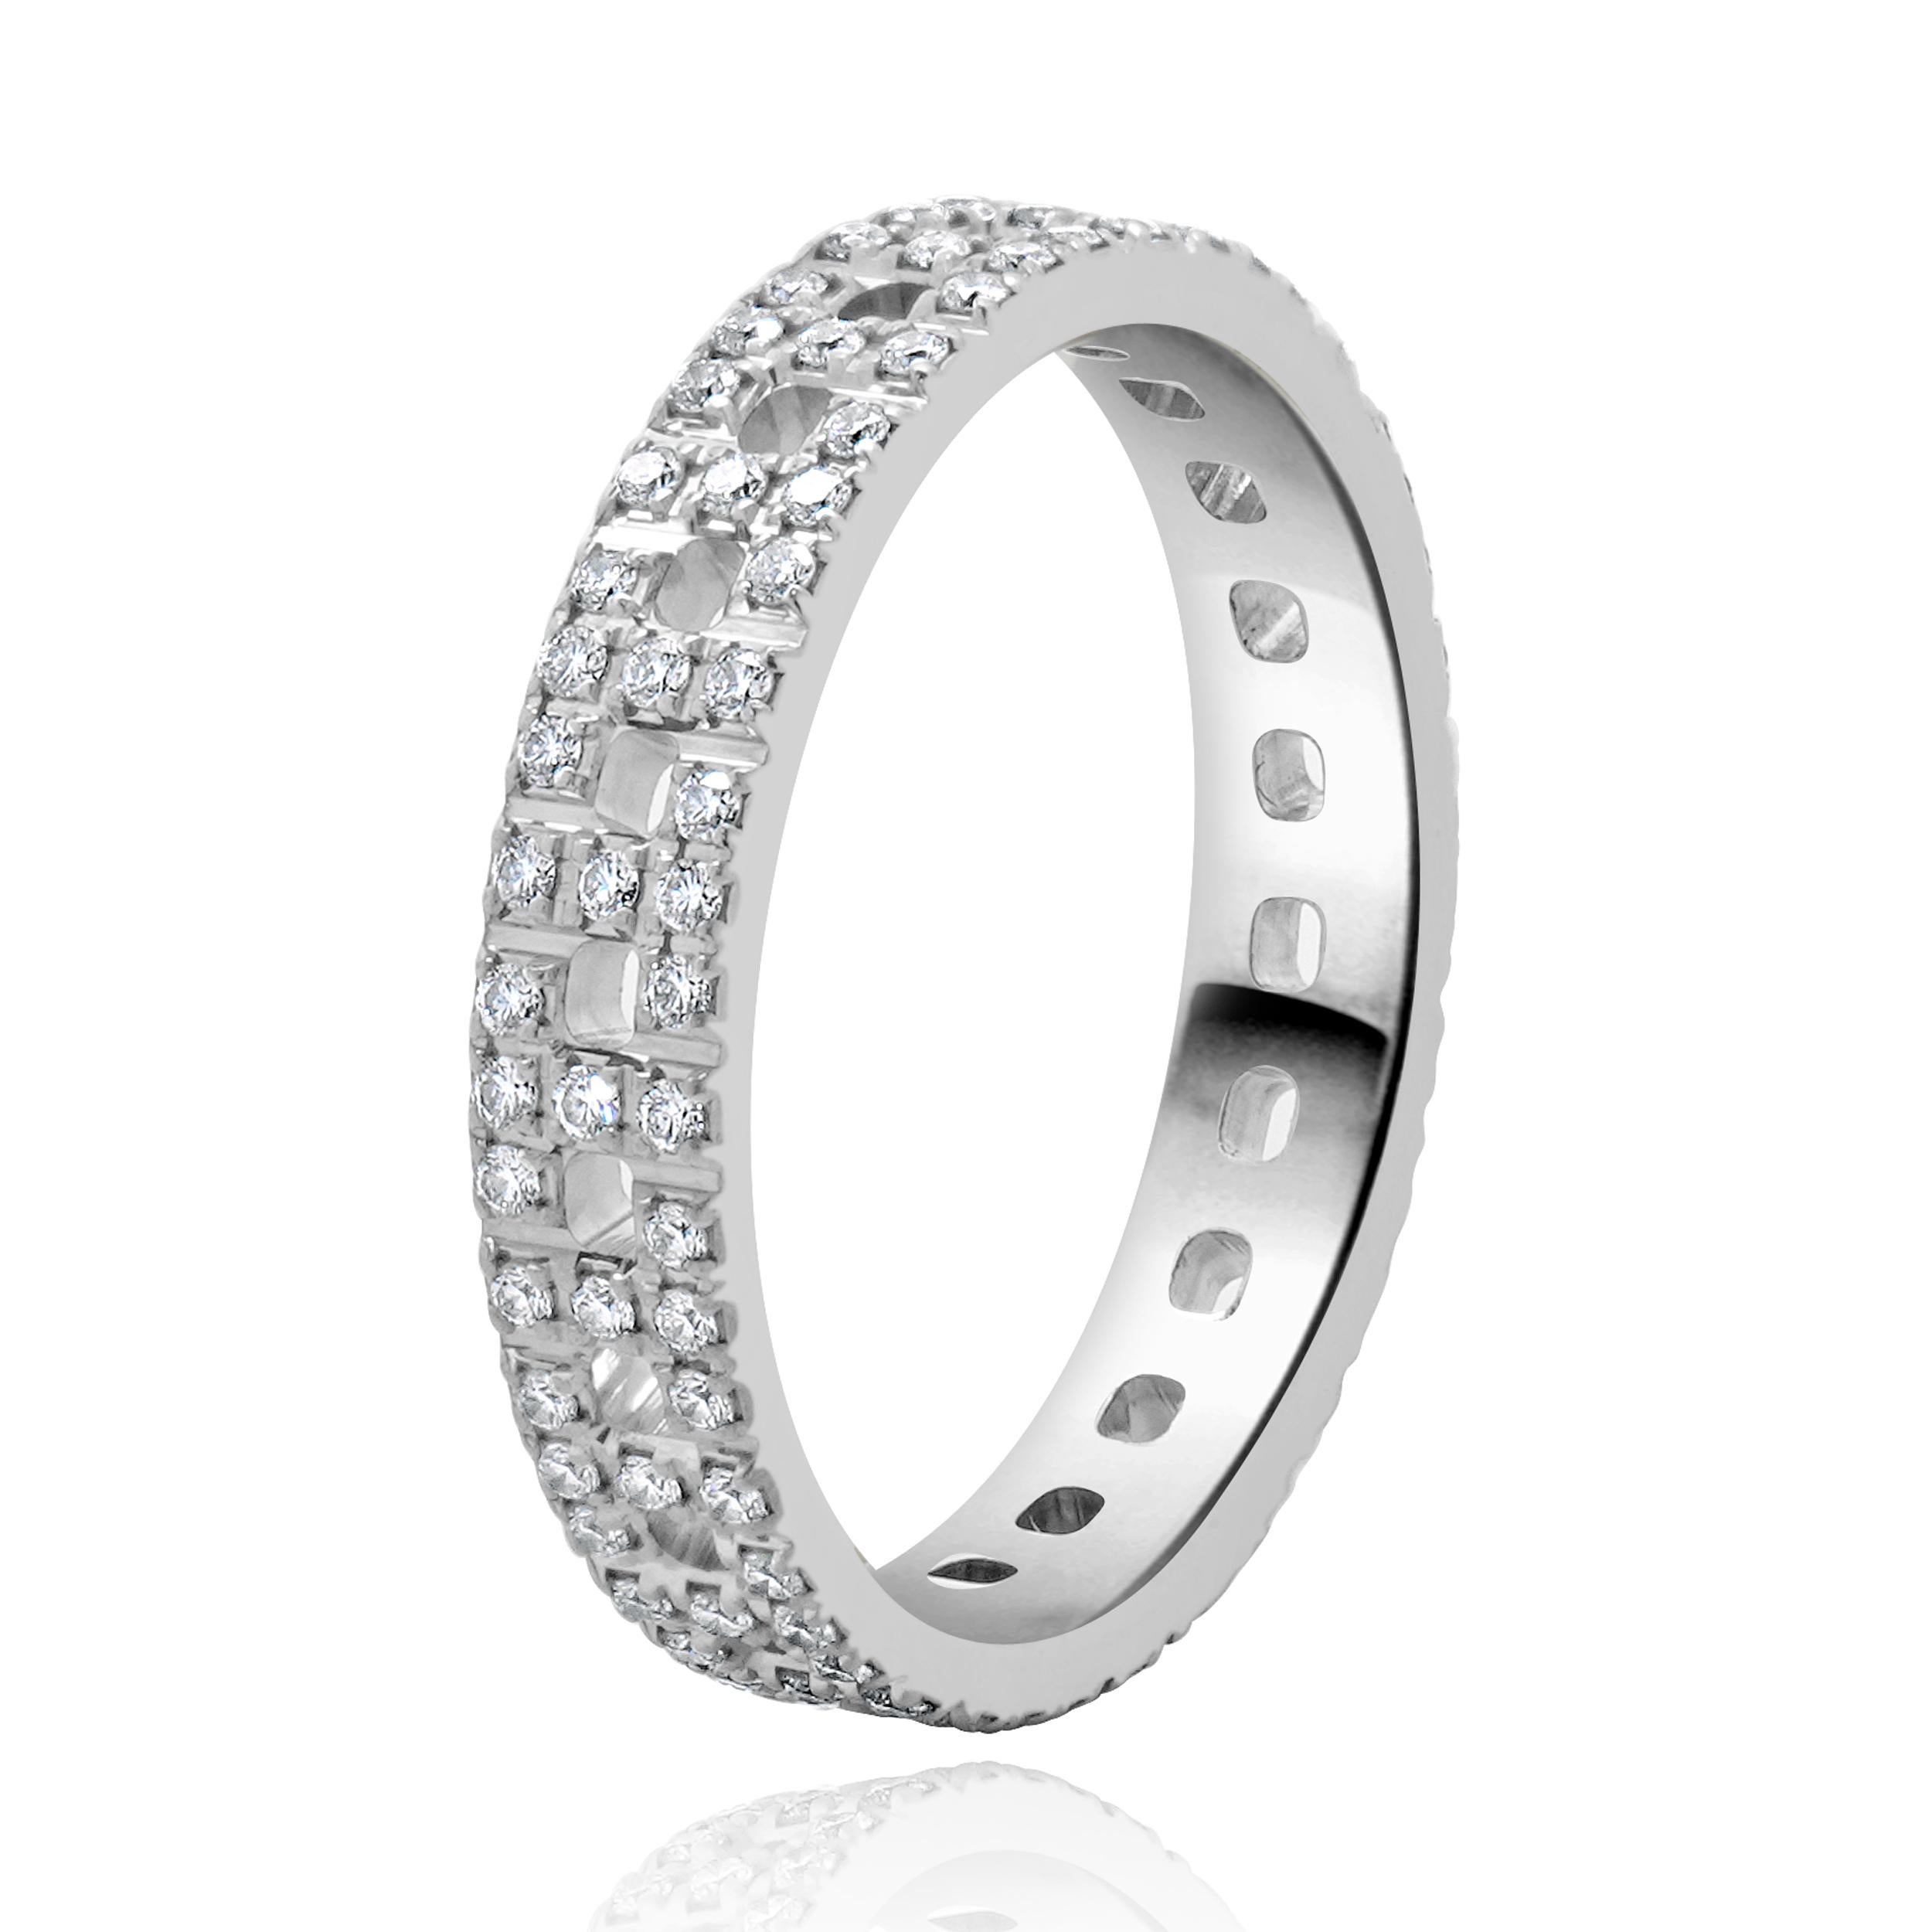 Designer: Tiffany & Co. 
Material: 18K white gold
Diamond: round brilliant cut = 0.23cttw
Color: G
Clarity: VS1-2
Dimensions: ring top measures 3.5mm wide
Size: 4
Weight: 2.77 grams
